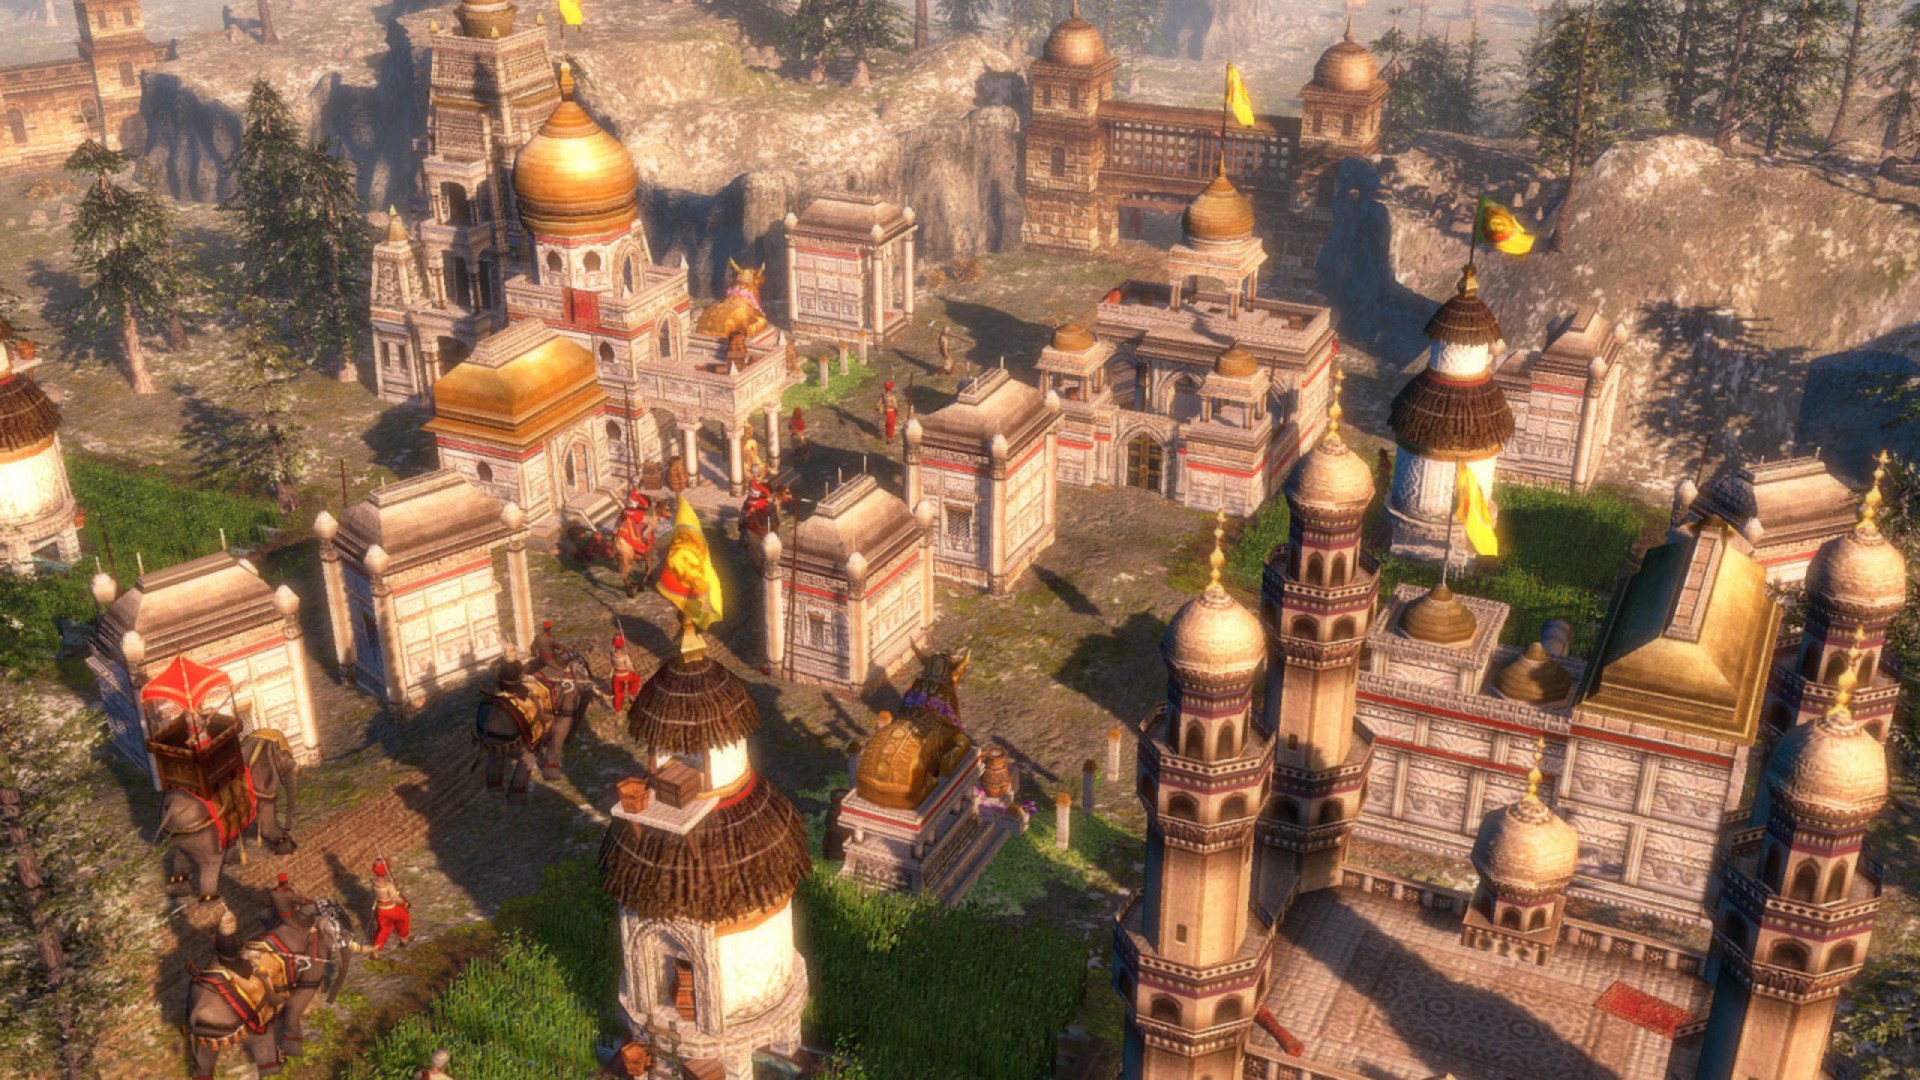 age of empires 3 complete collection mods